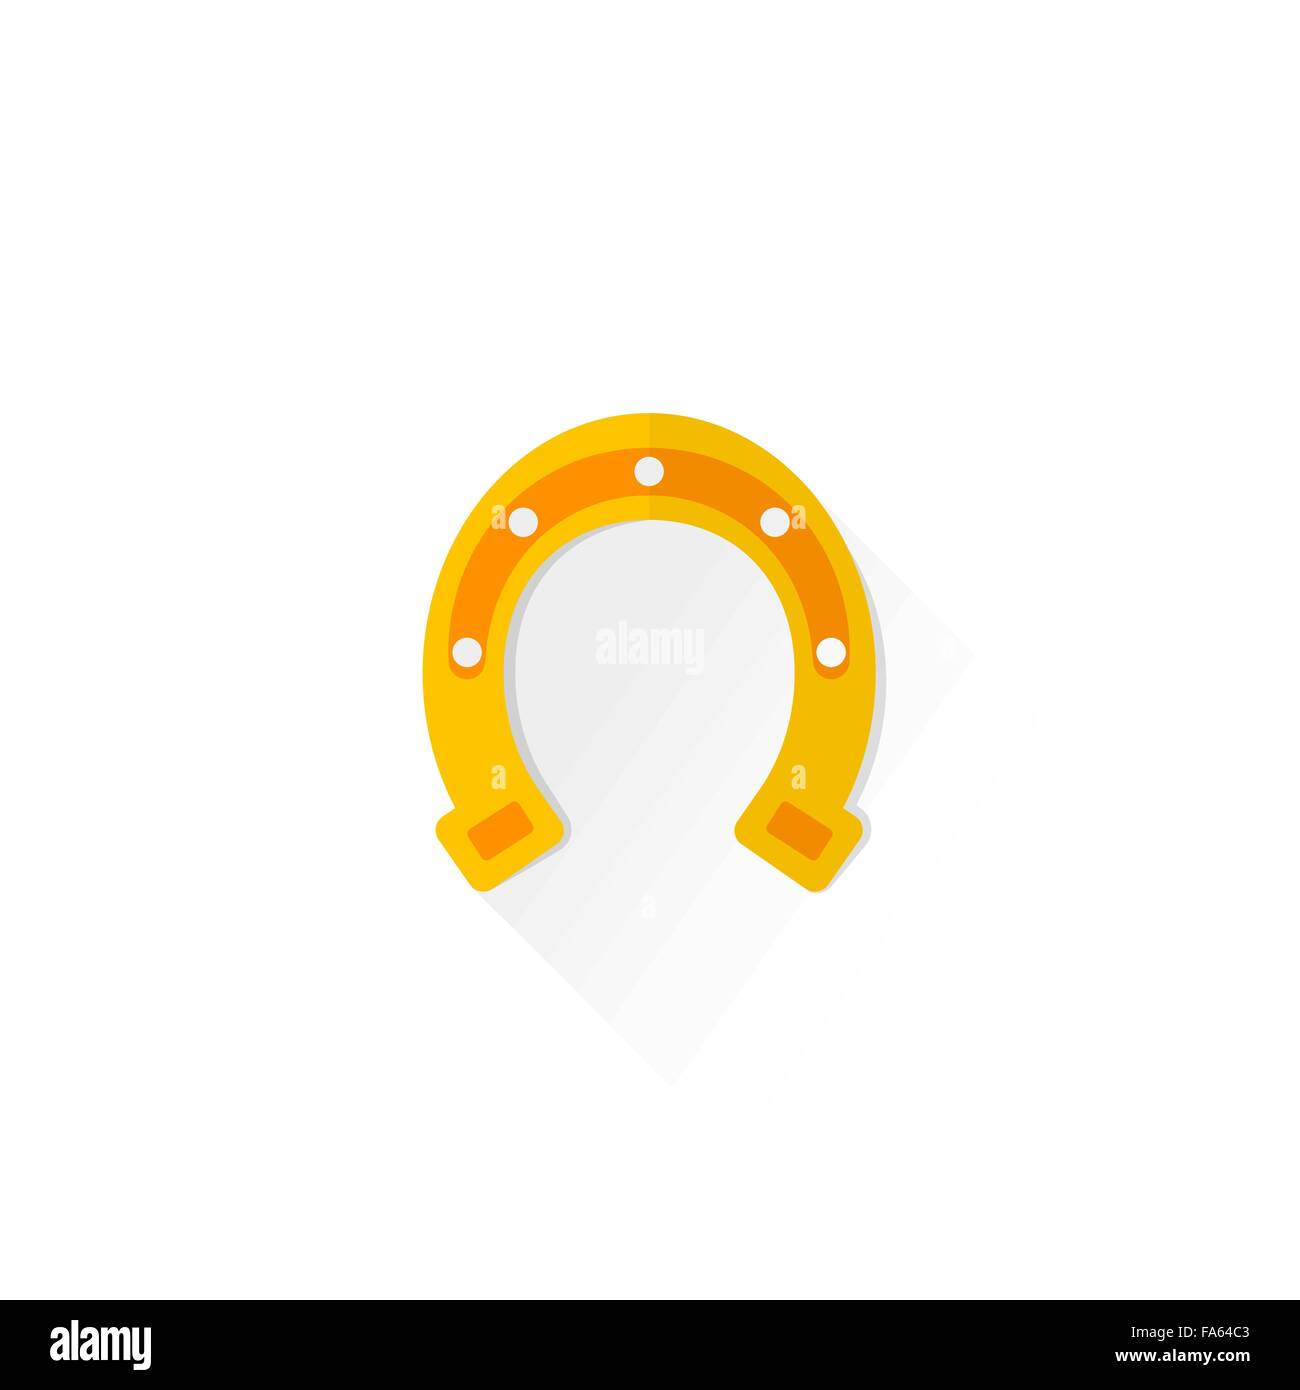 vector yellow gold colored flat design horseshoe lucky sign isolated illustration on white background with shadow Stock Vector